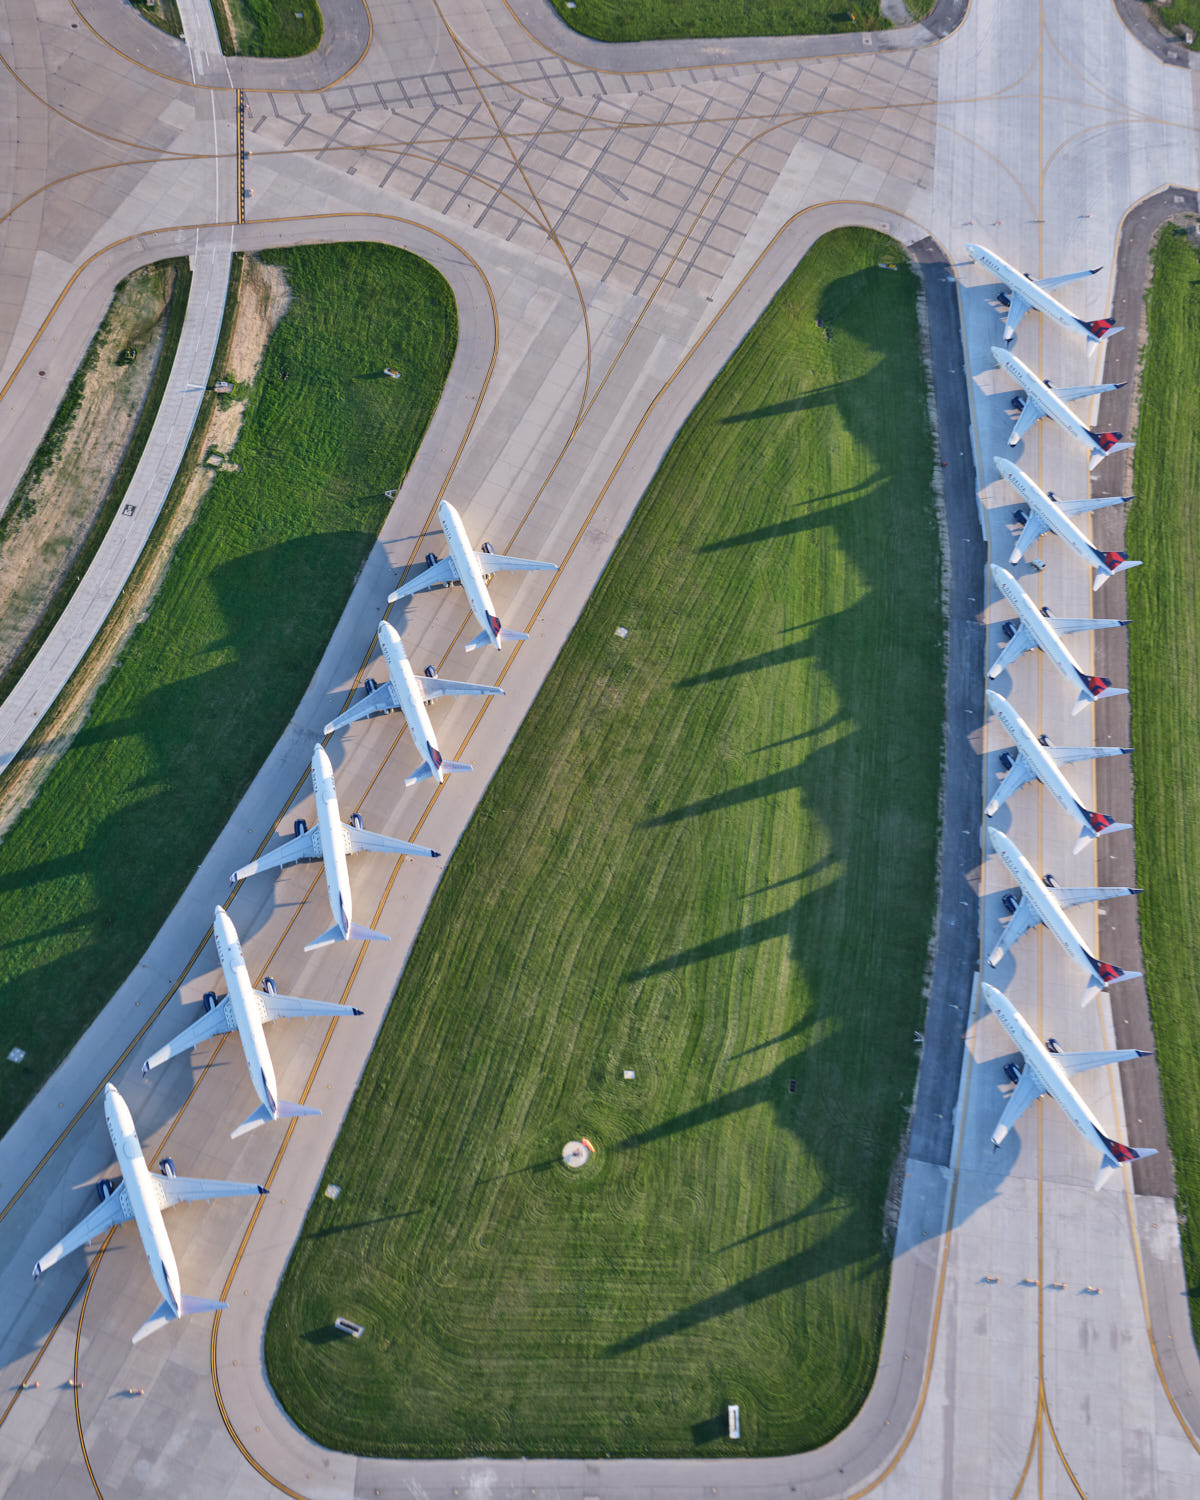 an aerial view of airplanes on a runway